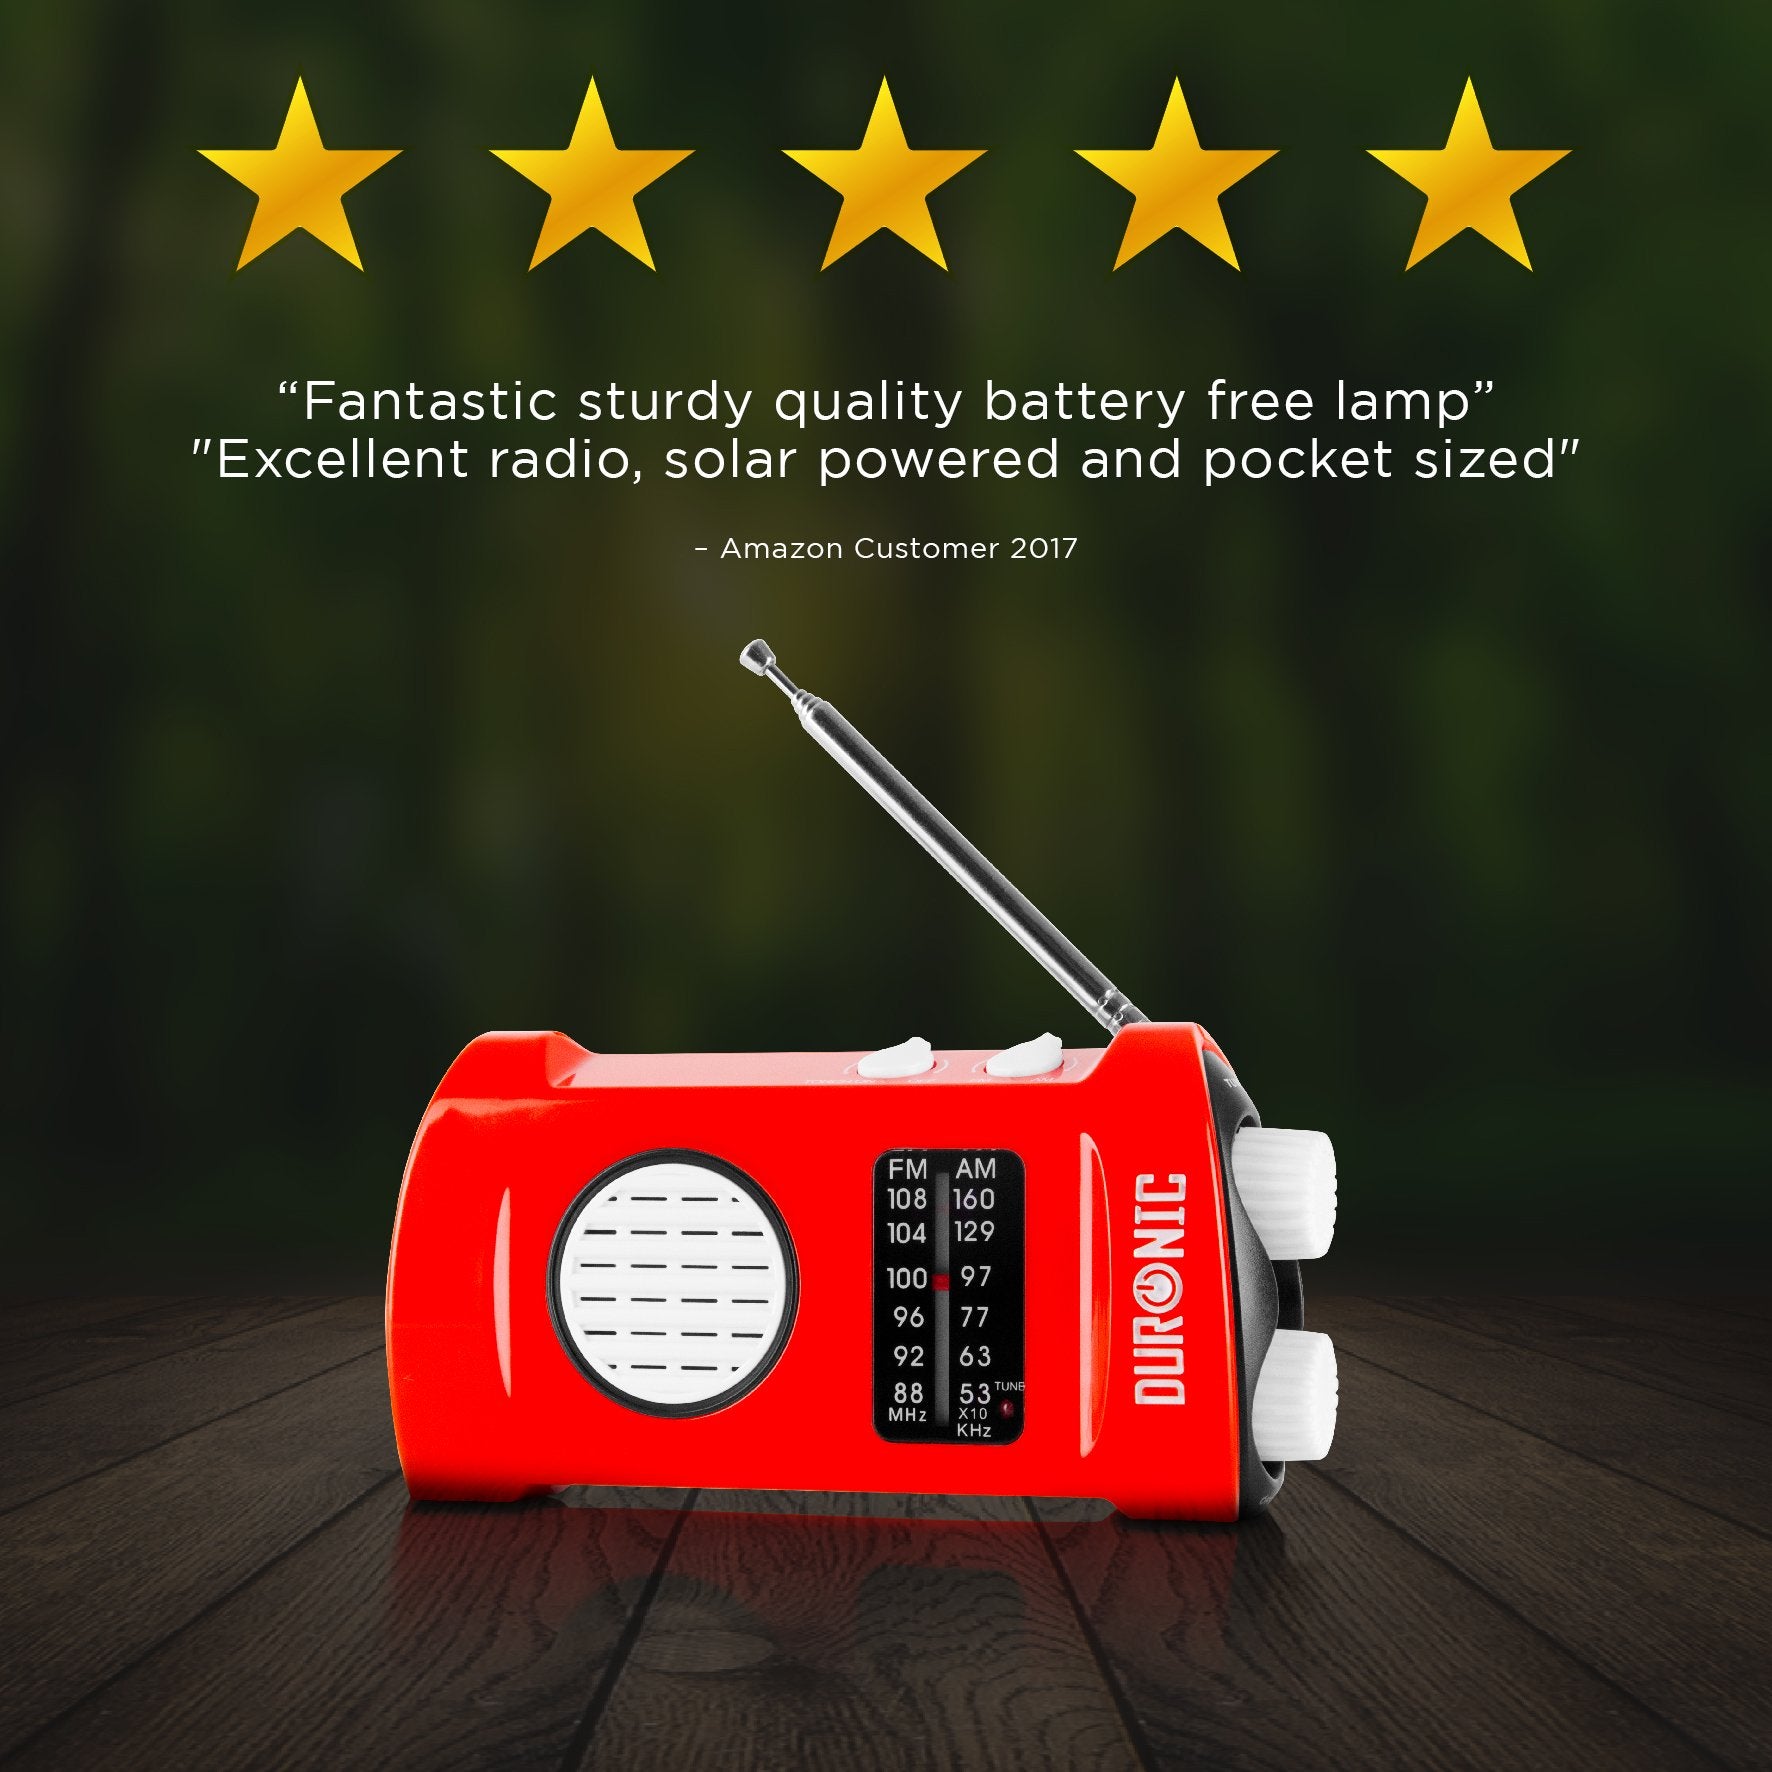 Duronic AM/FM Radio ECOHAND, Solar Powered Radio with LED Torch, Wind-Up Charging, Headphone Jack and Integrated Flashlight for Camping, Hiking and Emergency Use